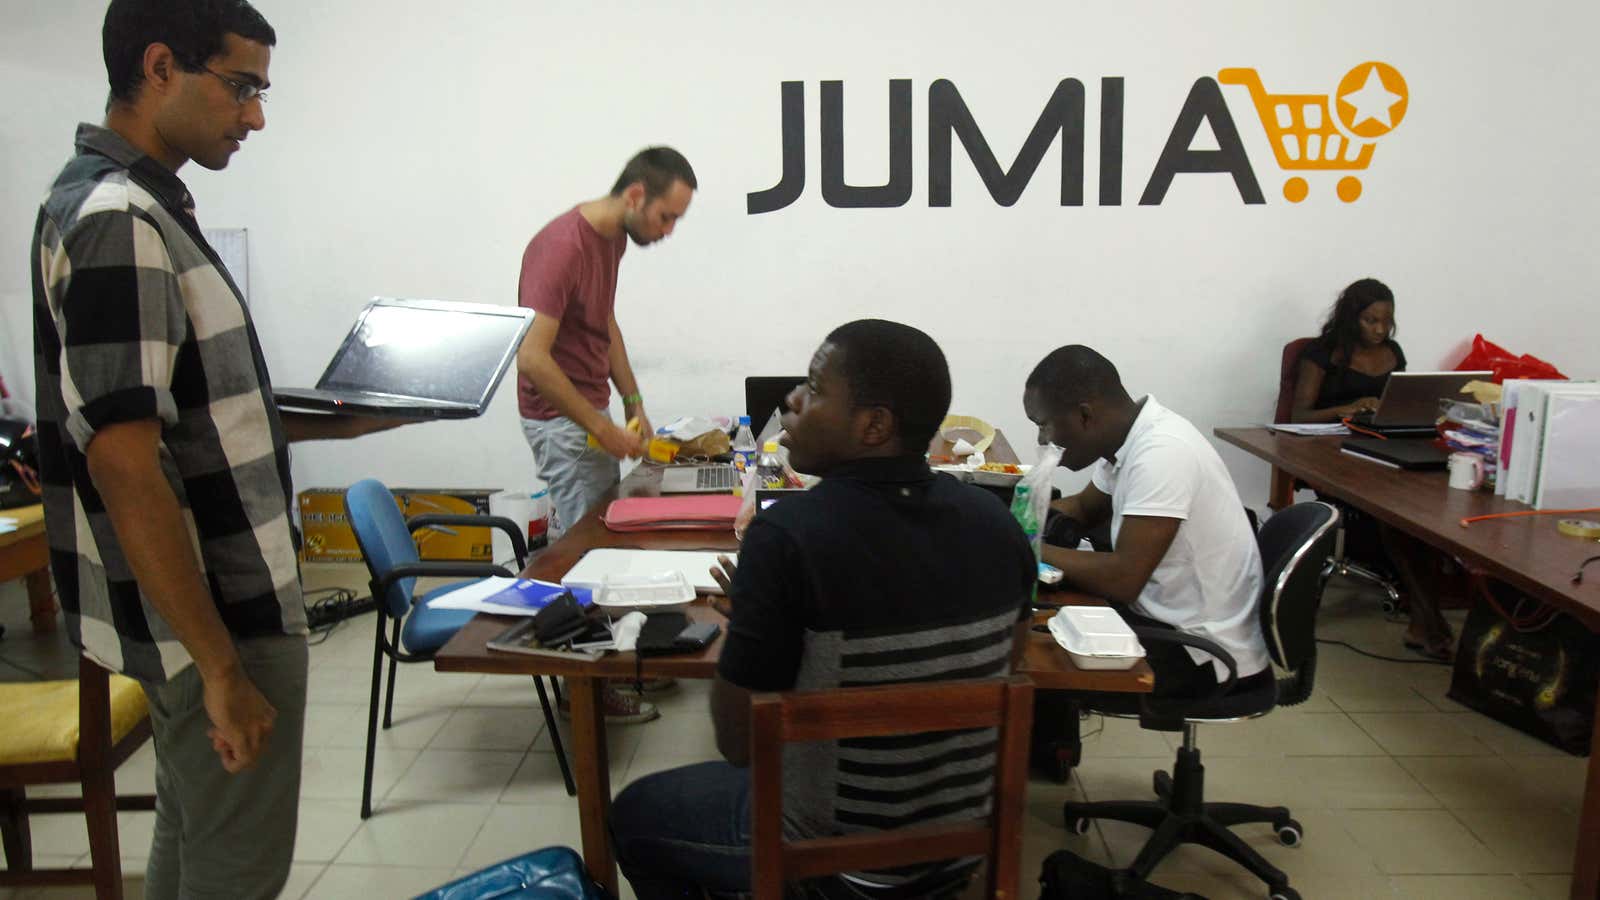 Jumia is the largest e-commerce operator across Africa.